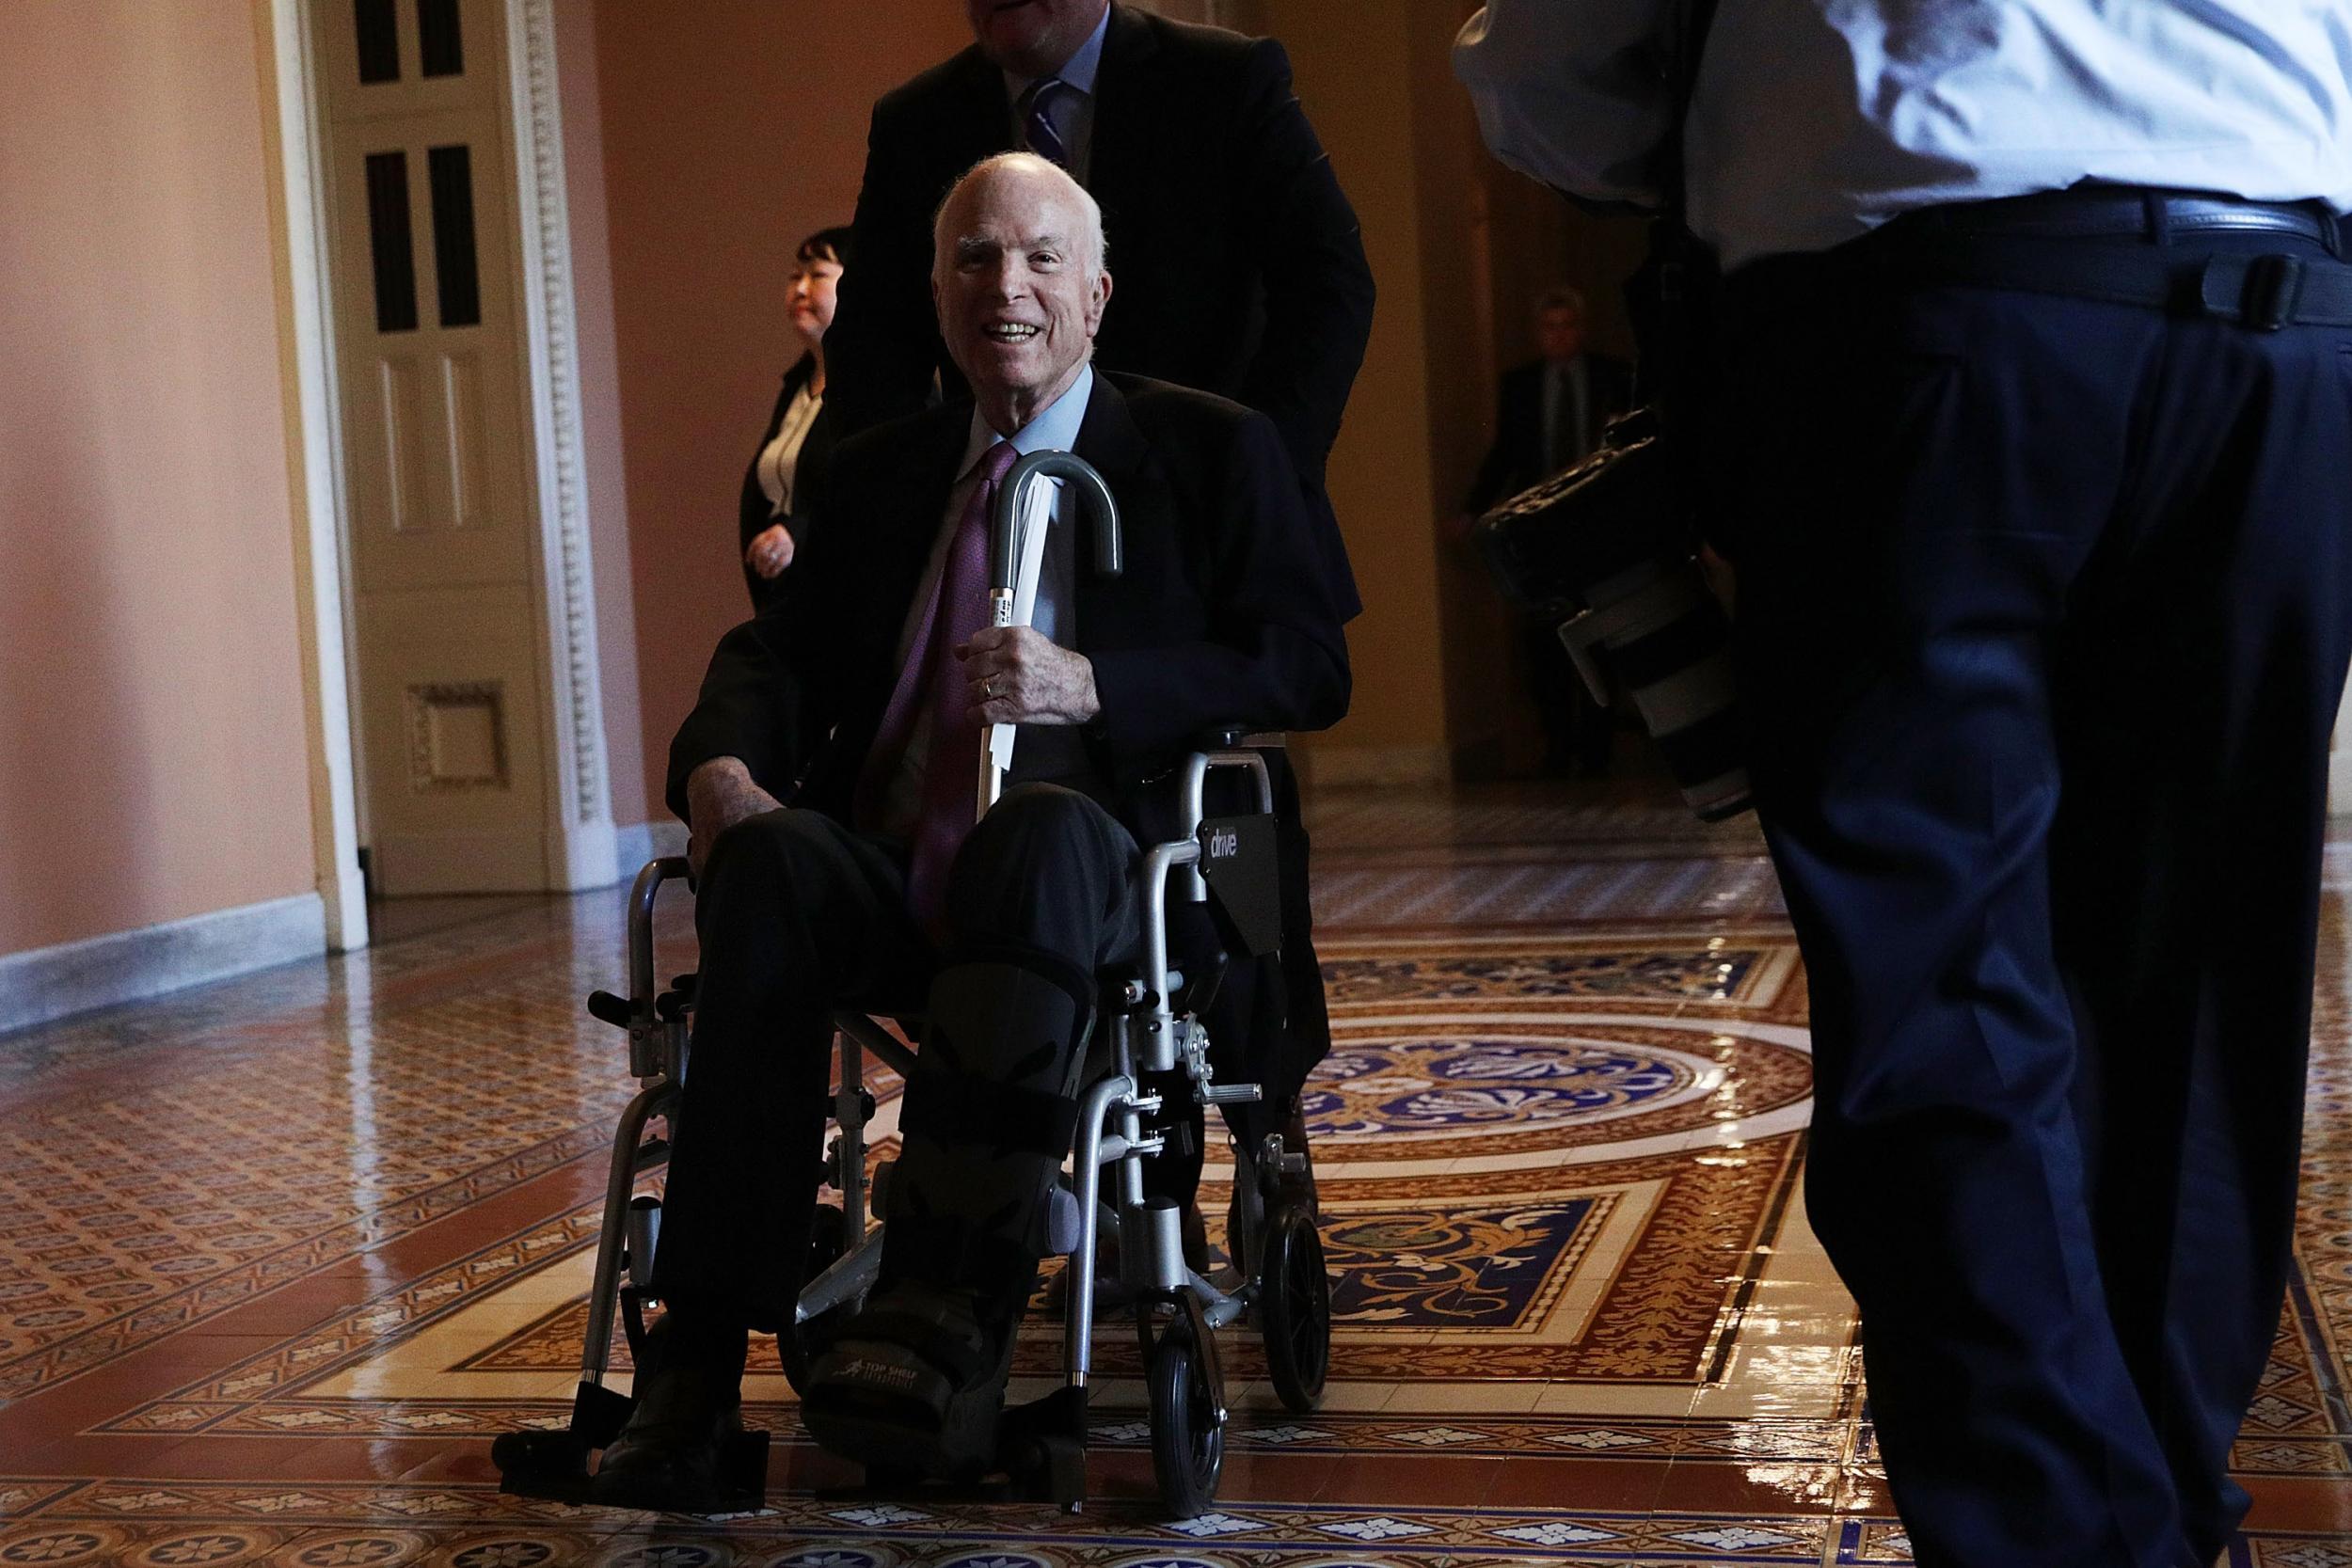 Senator McCain returned home before Christmas after being hospitalised but is recovering well